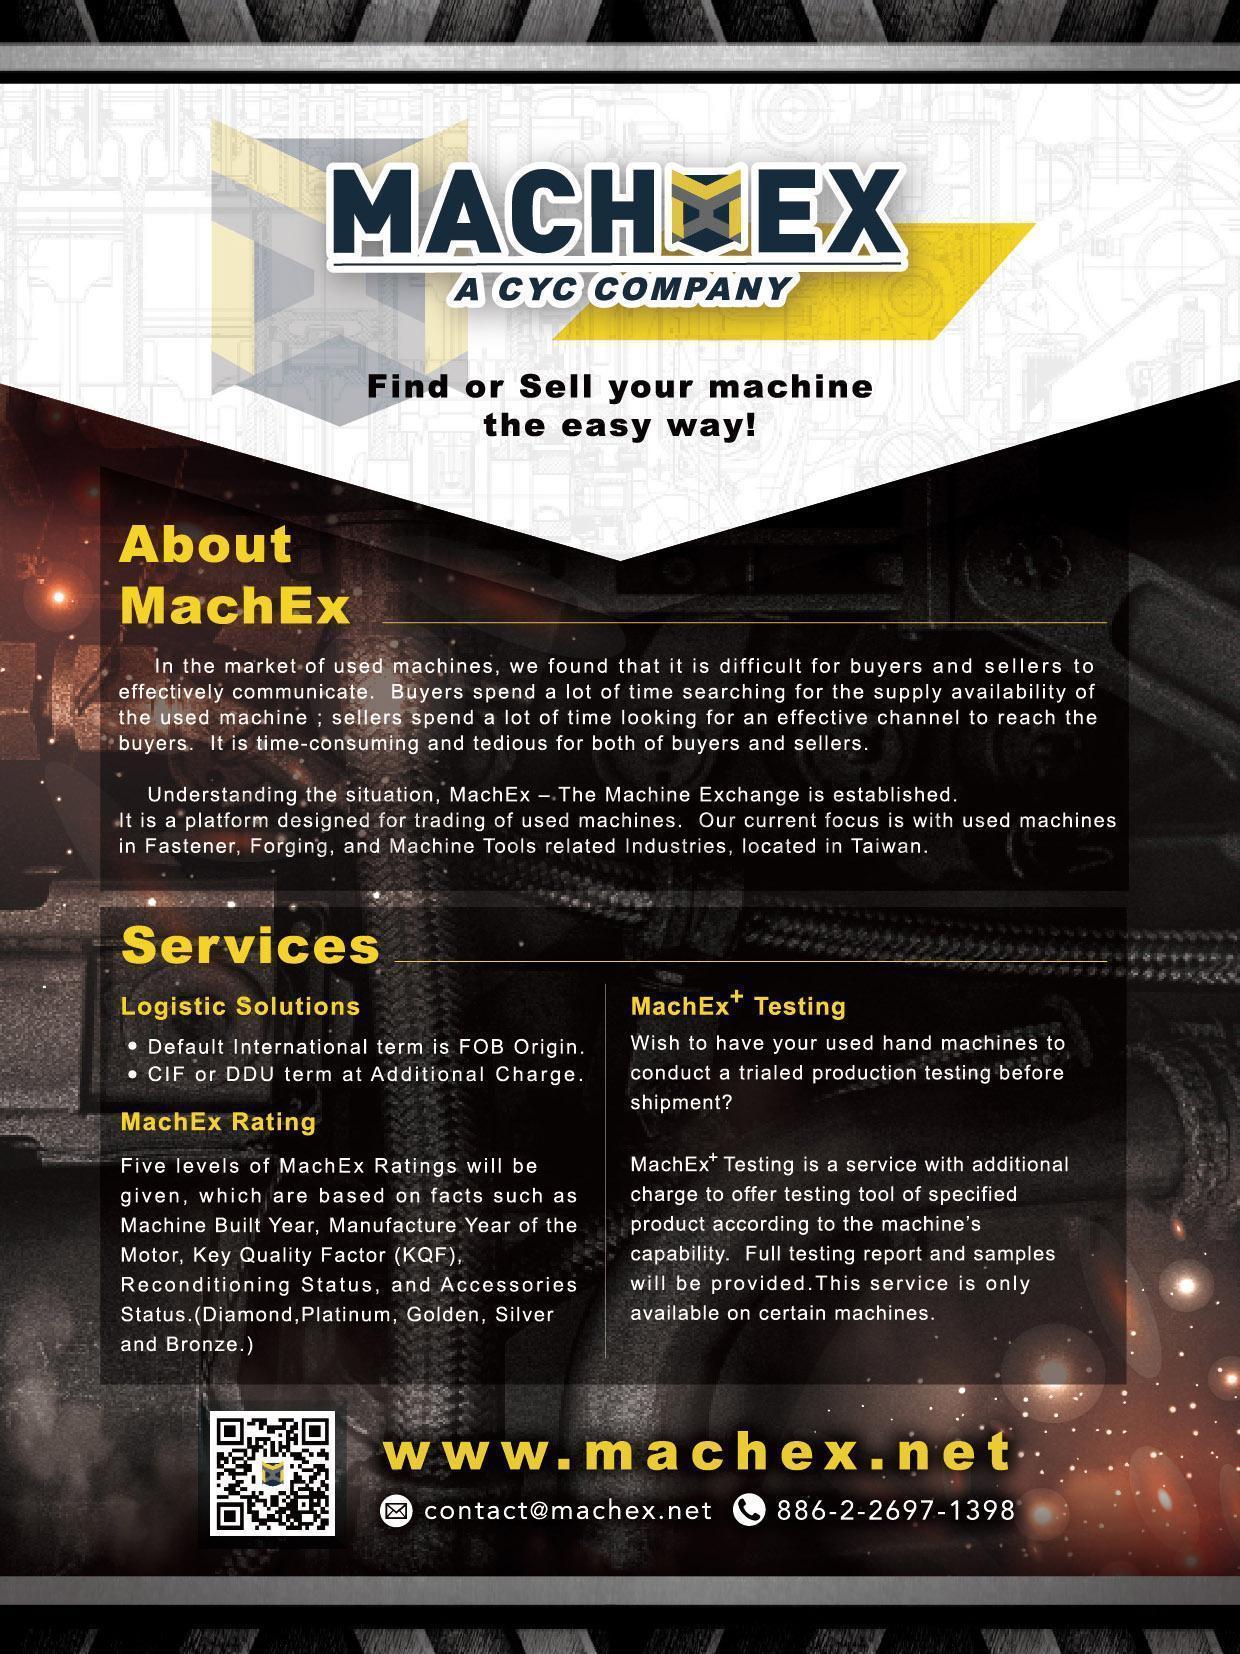  MachEx, Find or Sell your machine the easy way!